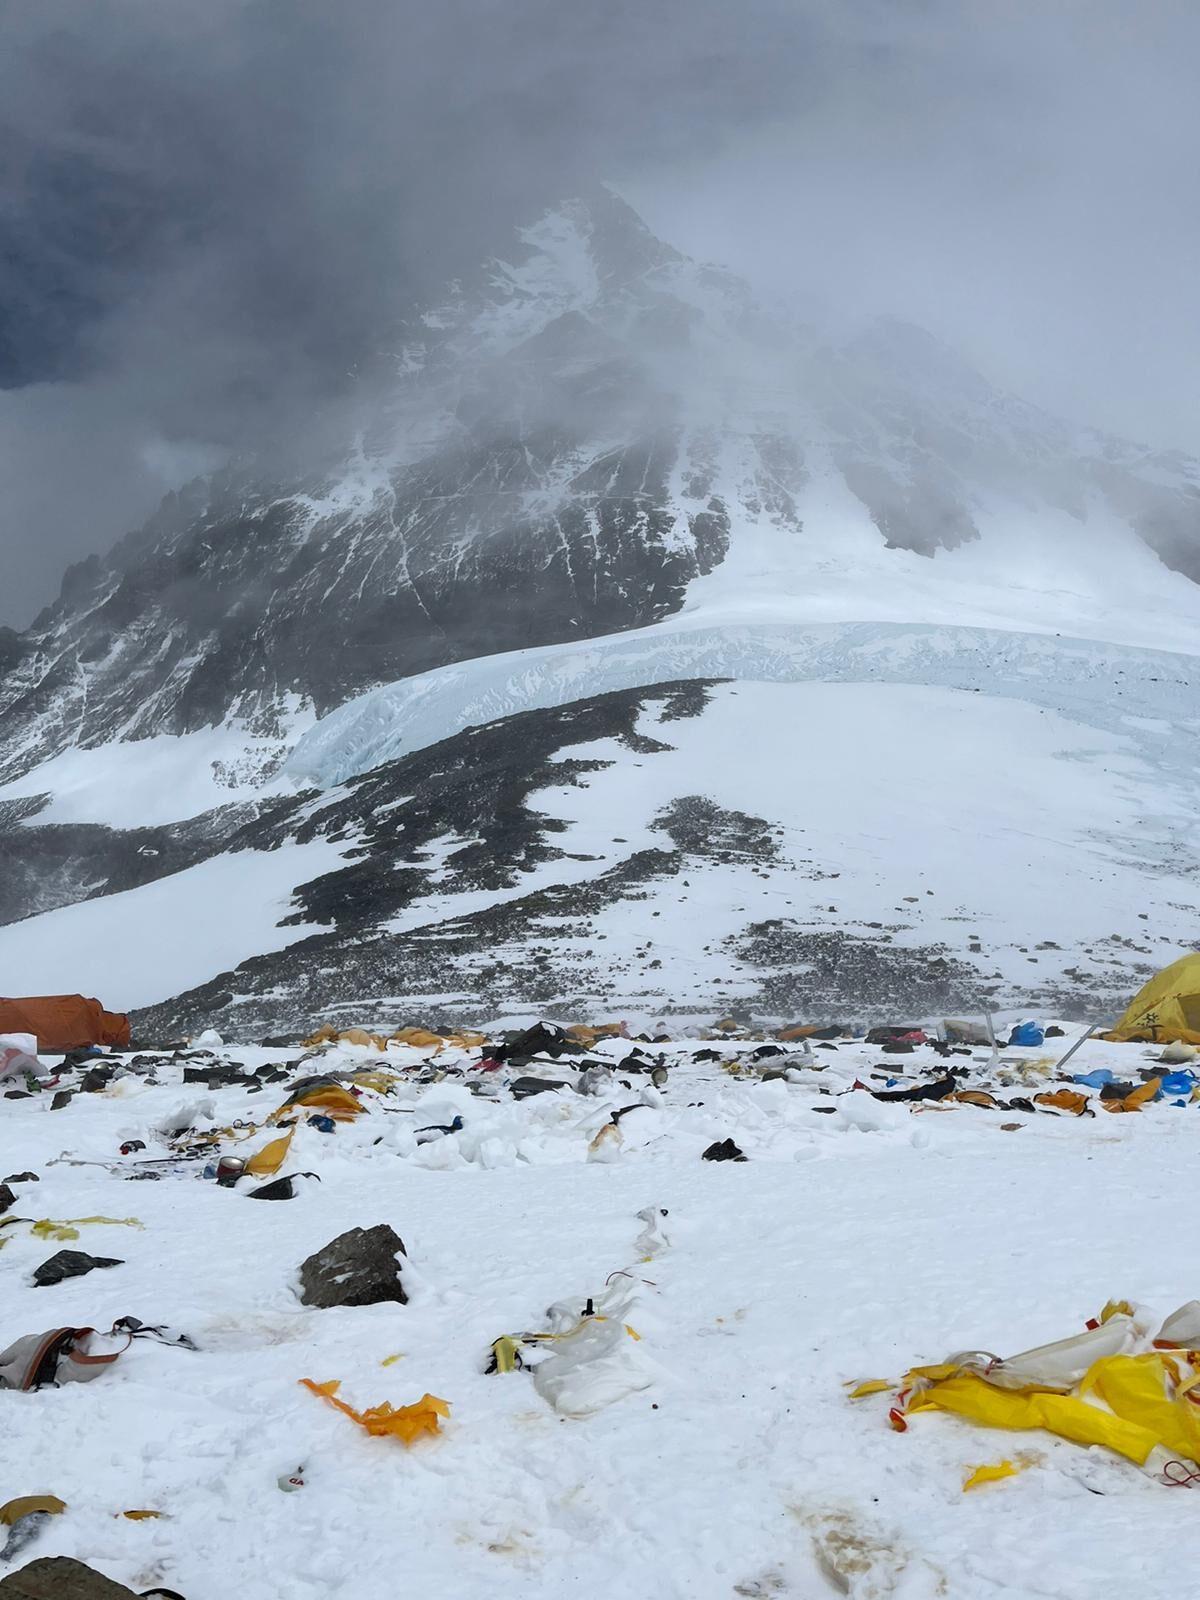 The weather turns bad on the way to the summit of Mount Everest. (Courtesy of Wong Yim Leung)